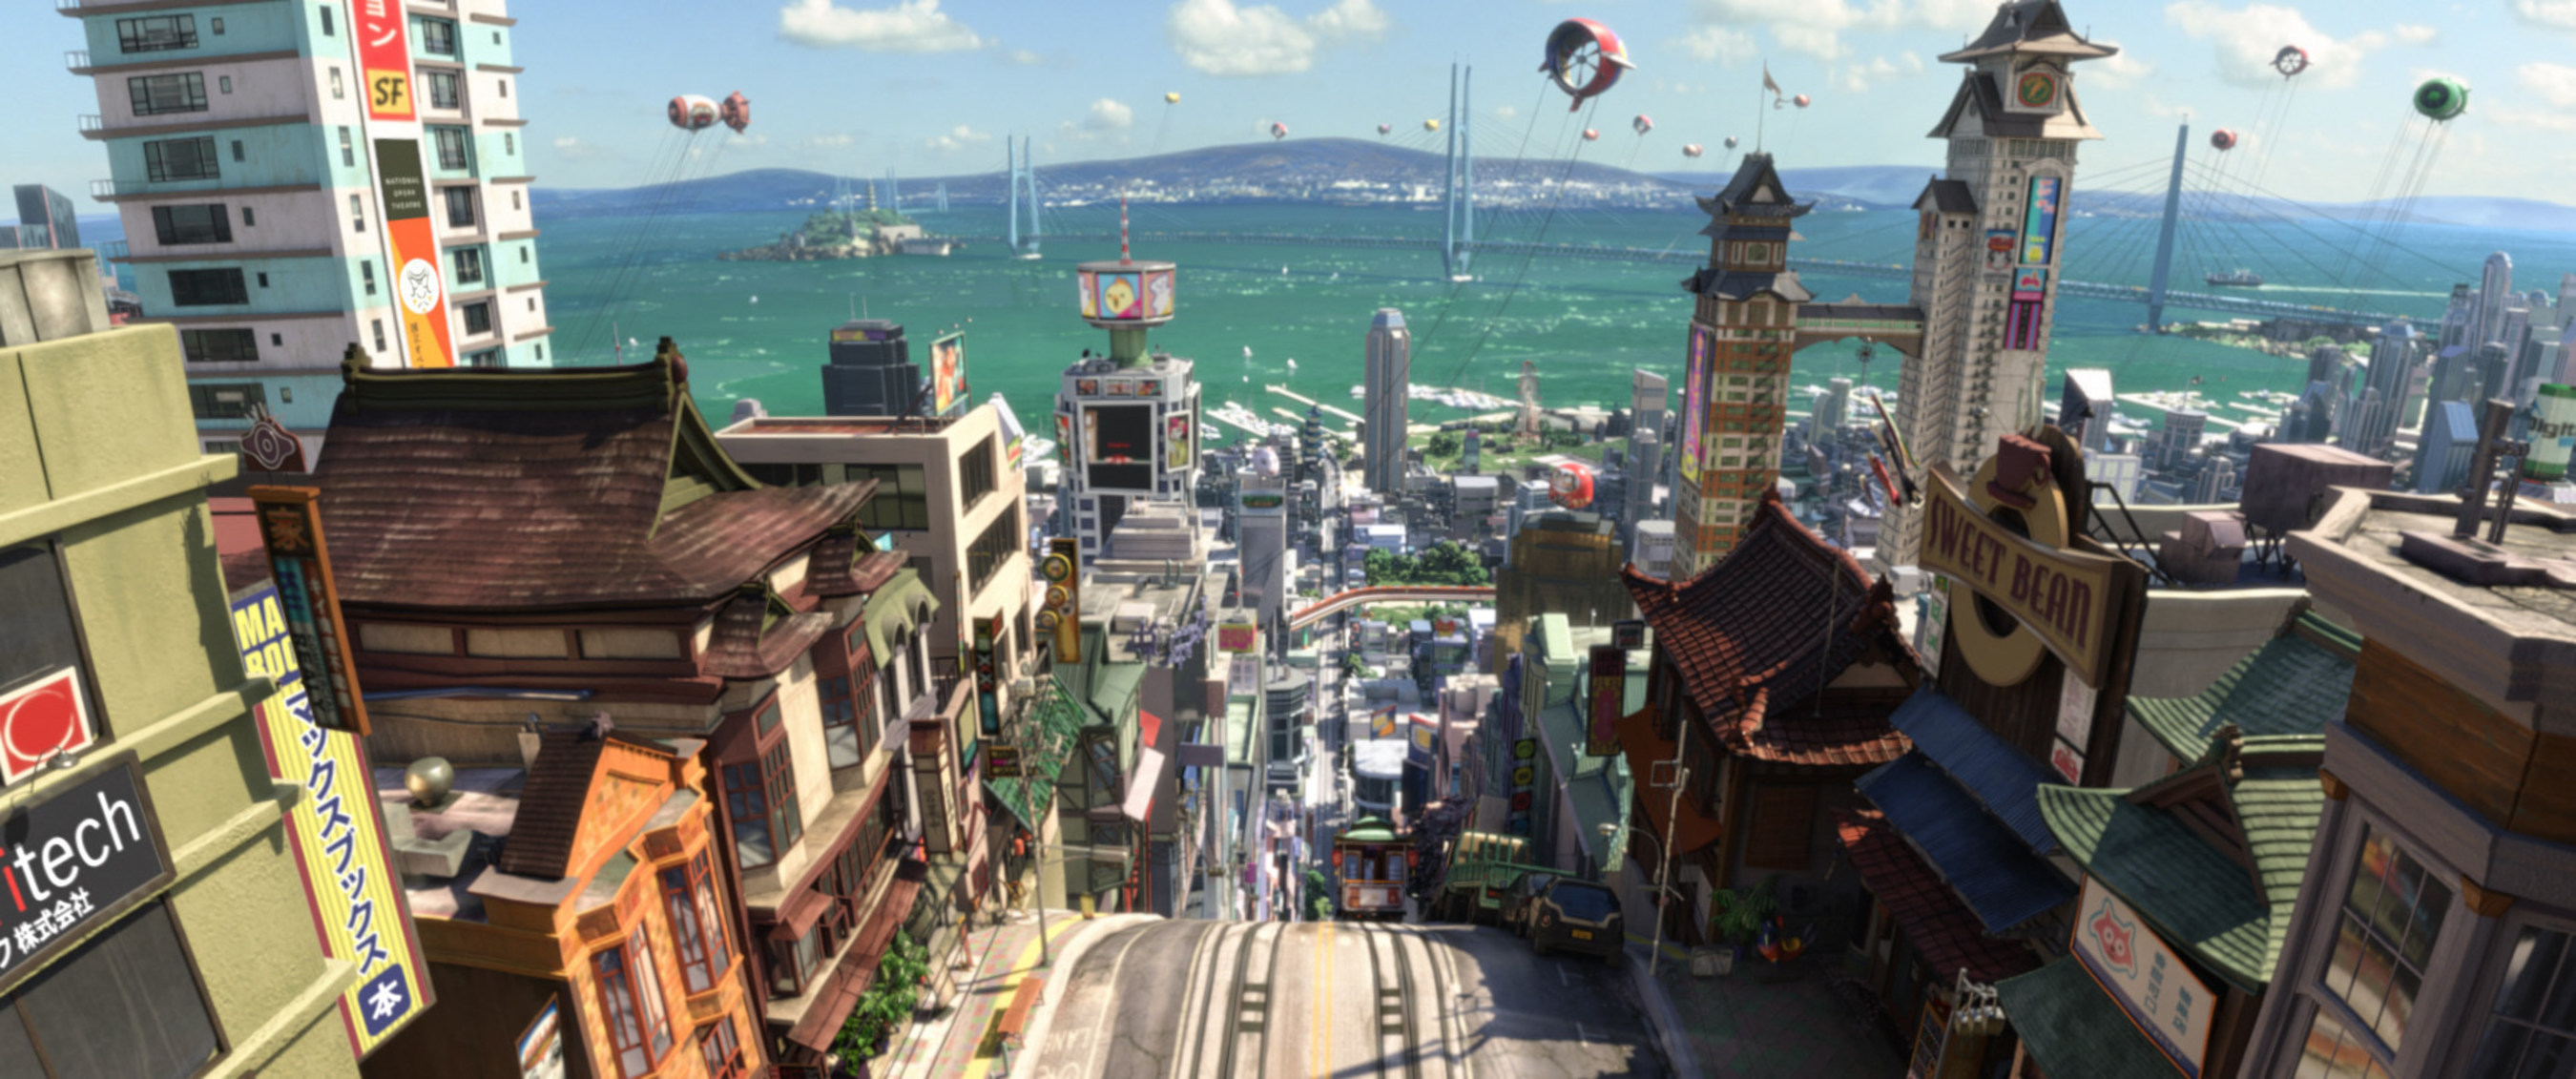 Guests are invited to see the city that inspired "Big Hero 6" filmmakers on the new Adventures by Disney San Francisco/Napa Long Weekend itinerary in 2015. In this still from the film, filmmakers captured the busy look of a bustling multicultural city in the look of San Fransokyo. (Disney)